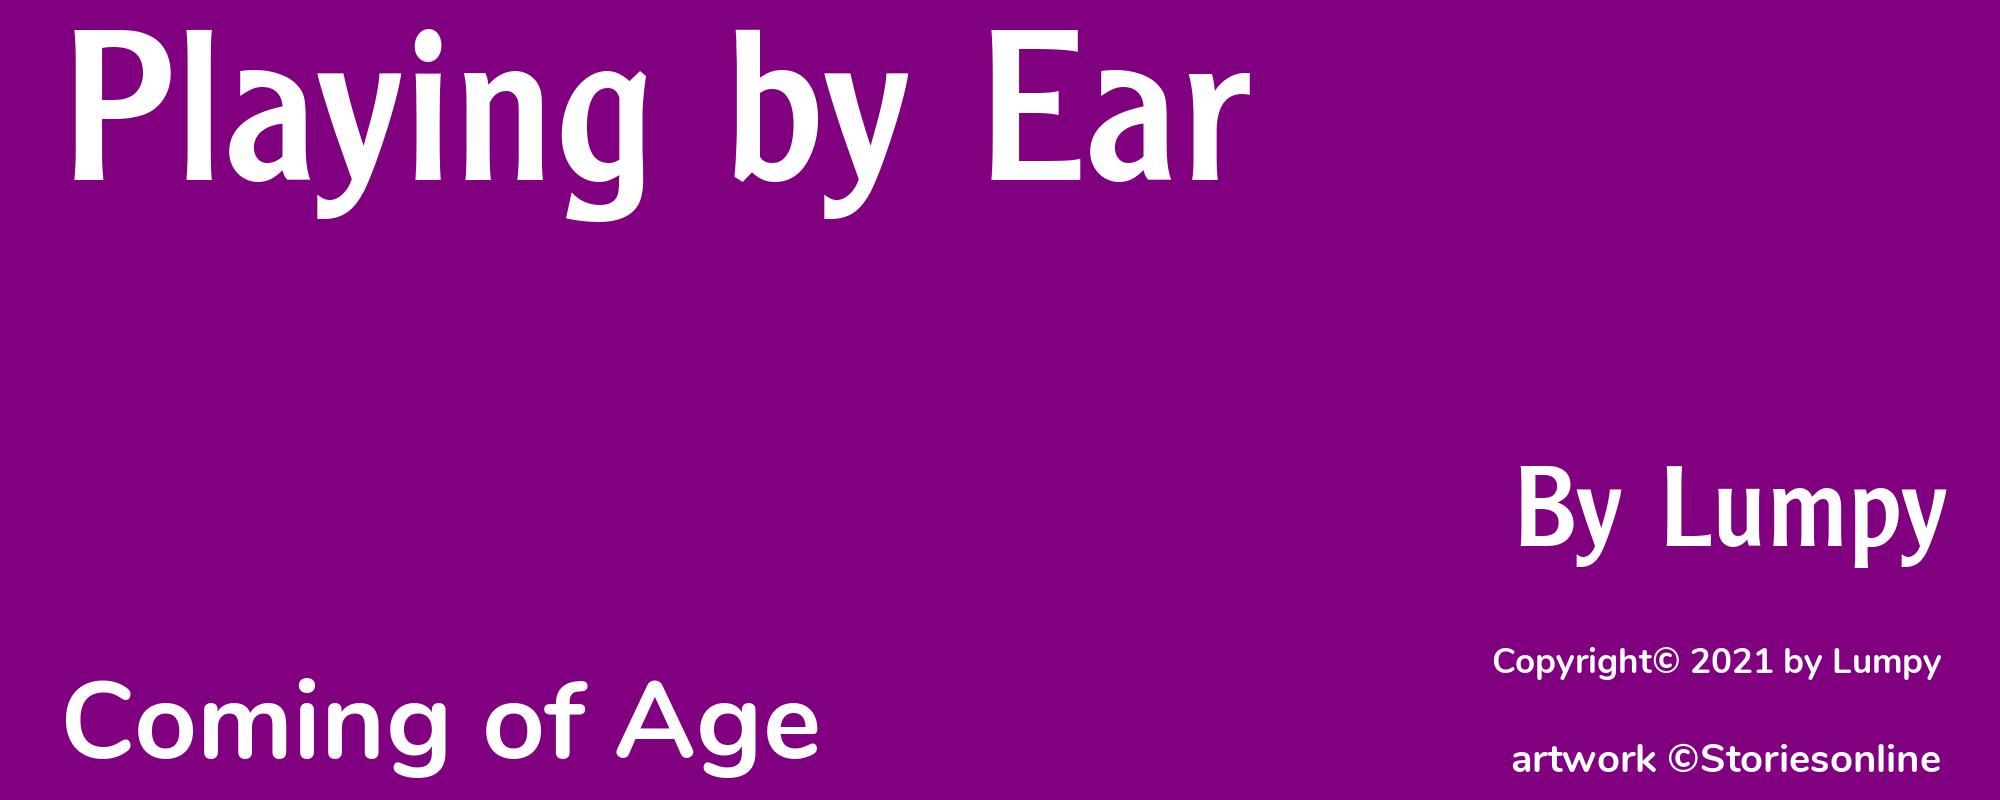 Playing by Ear - Cover